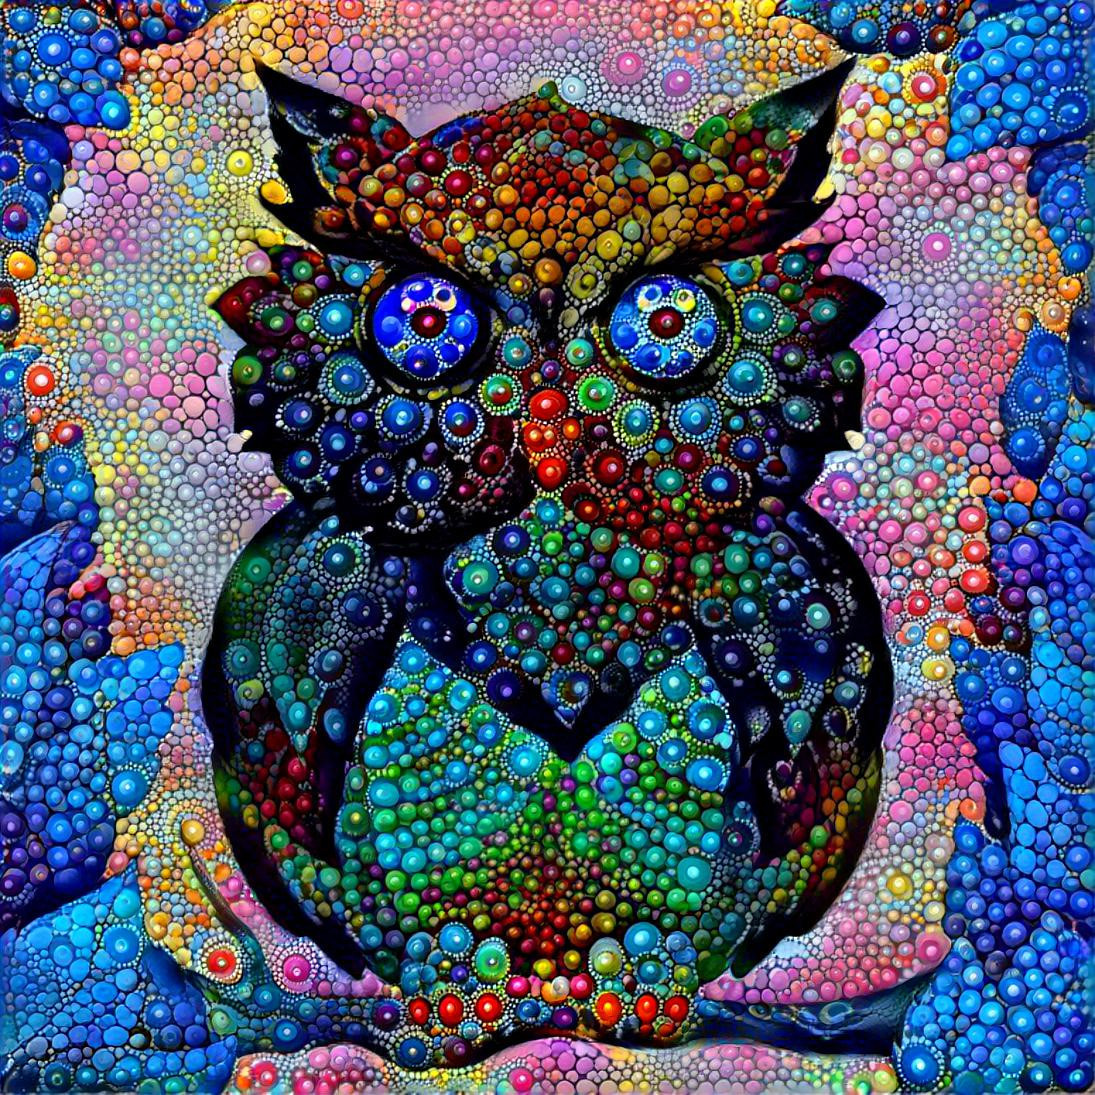 The Owl out of Space